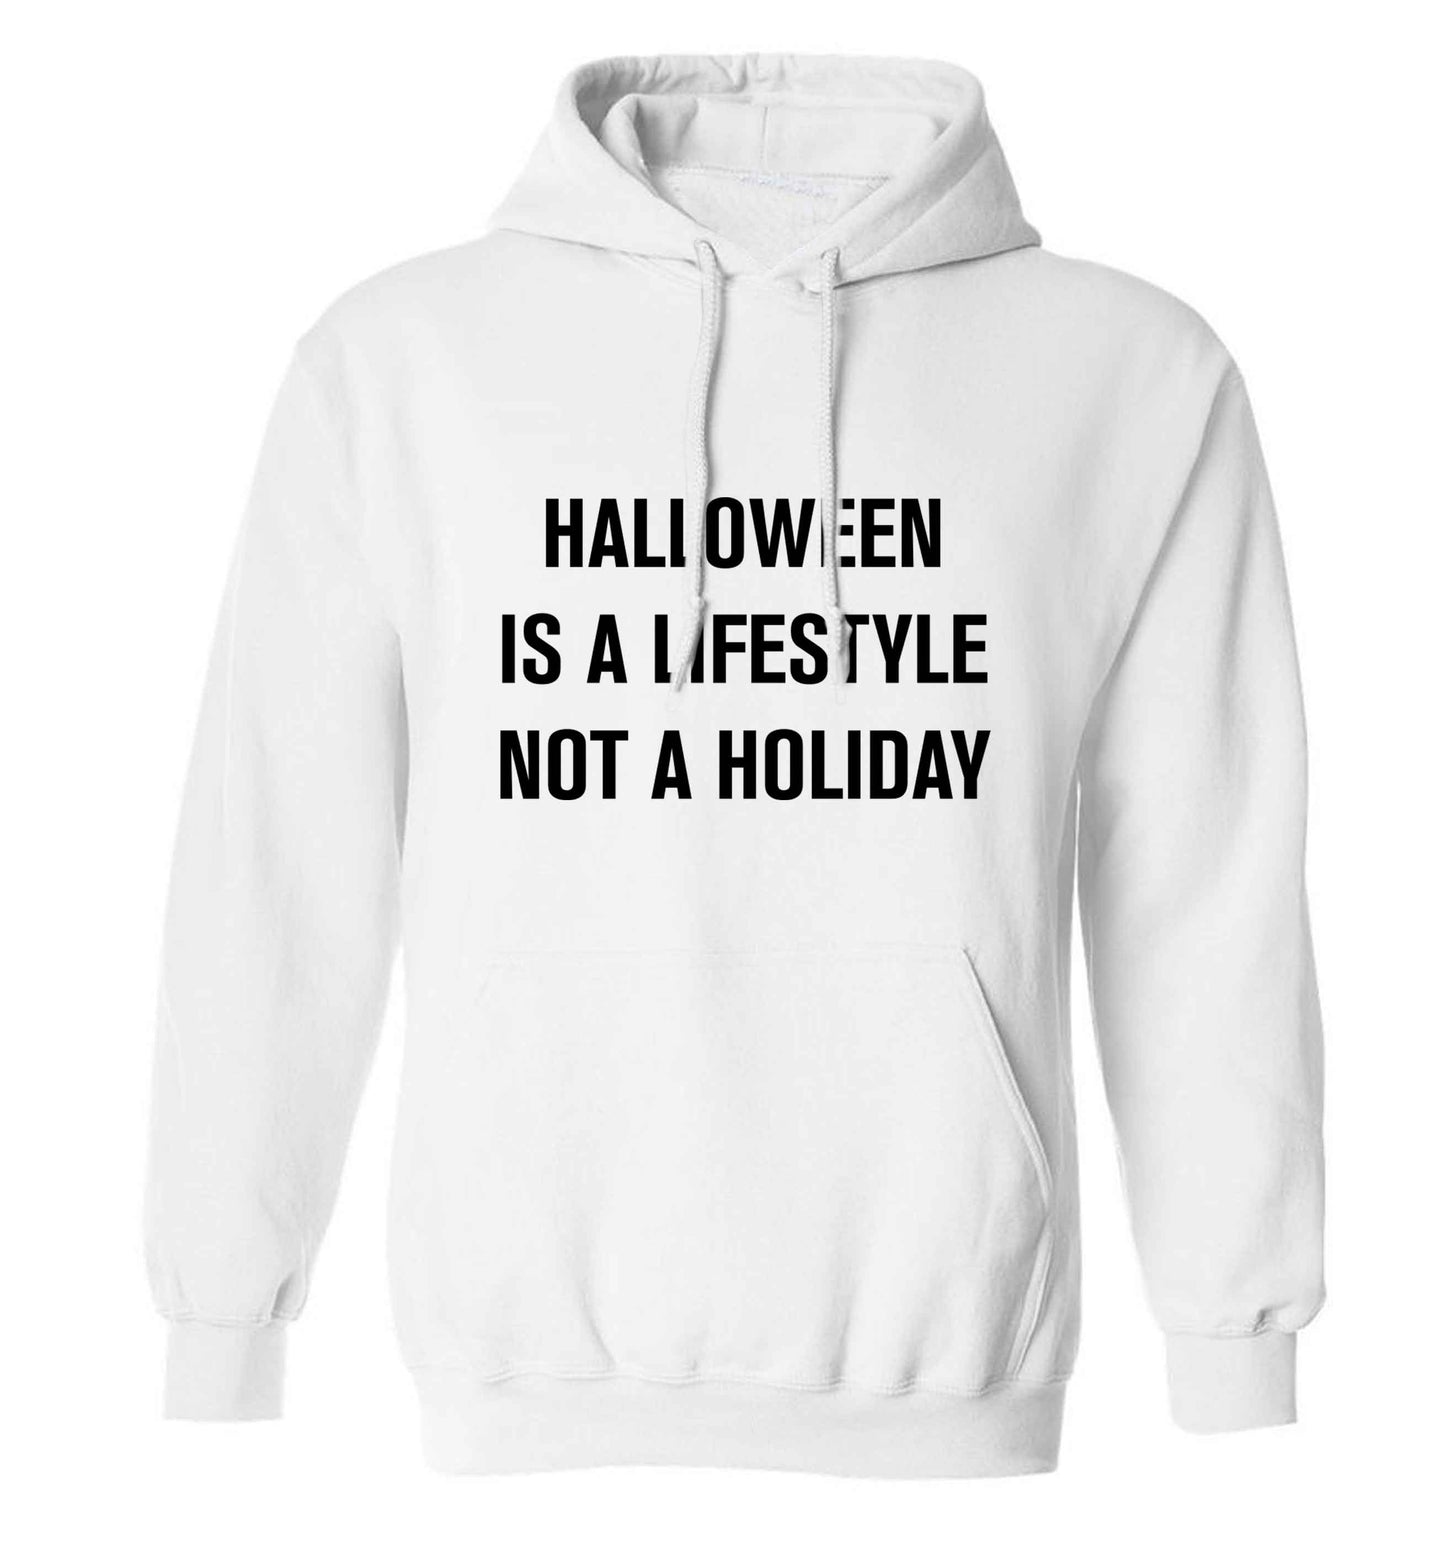 Halloween is a lifestyle not a holiday adults unisex white hoodie 2XL